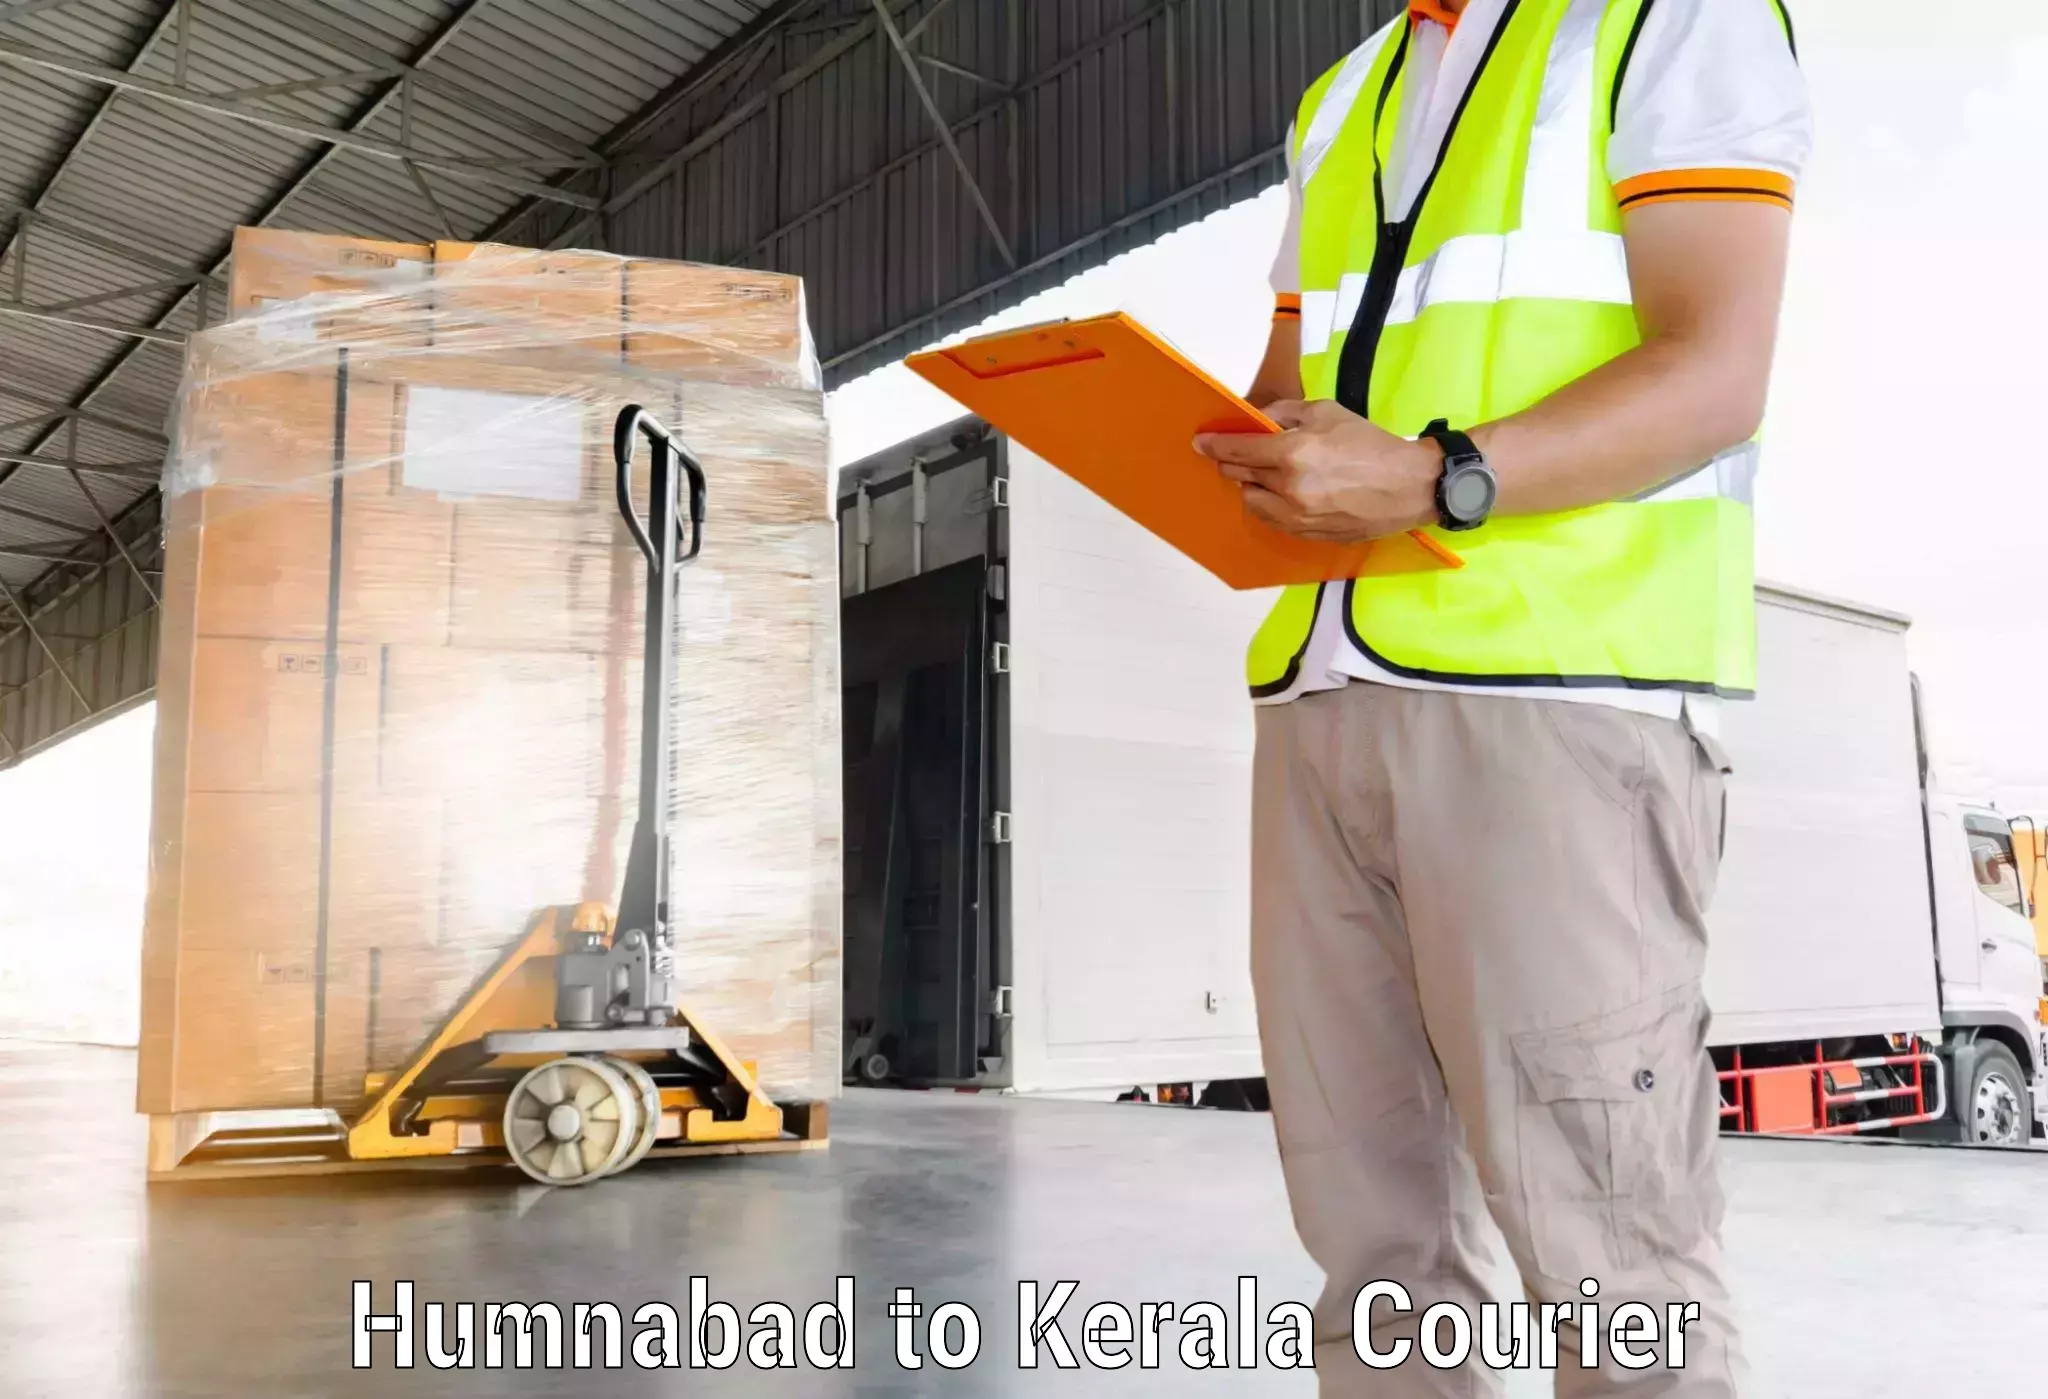 On-call courier service Humnabad to Kattappana